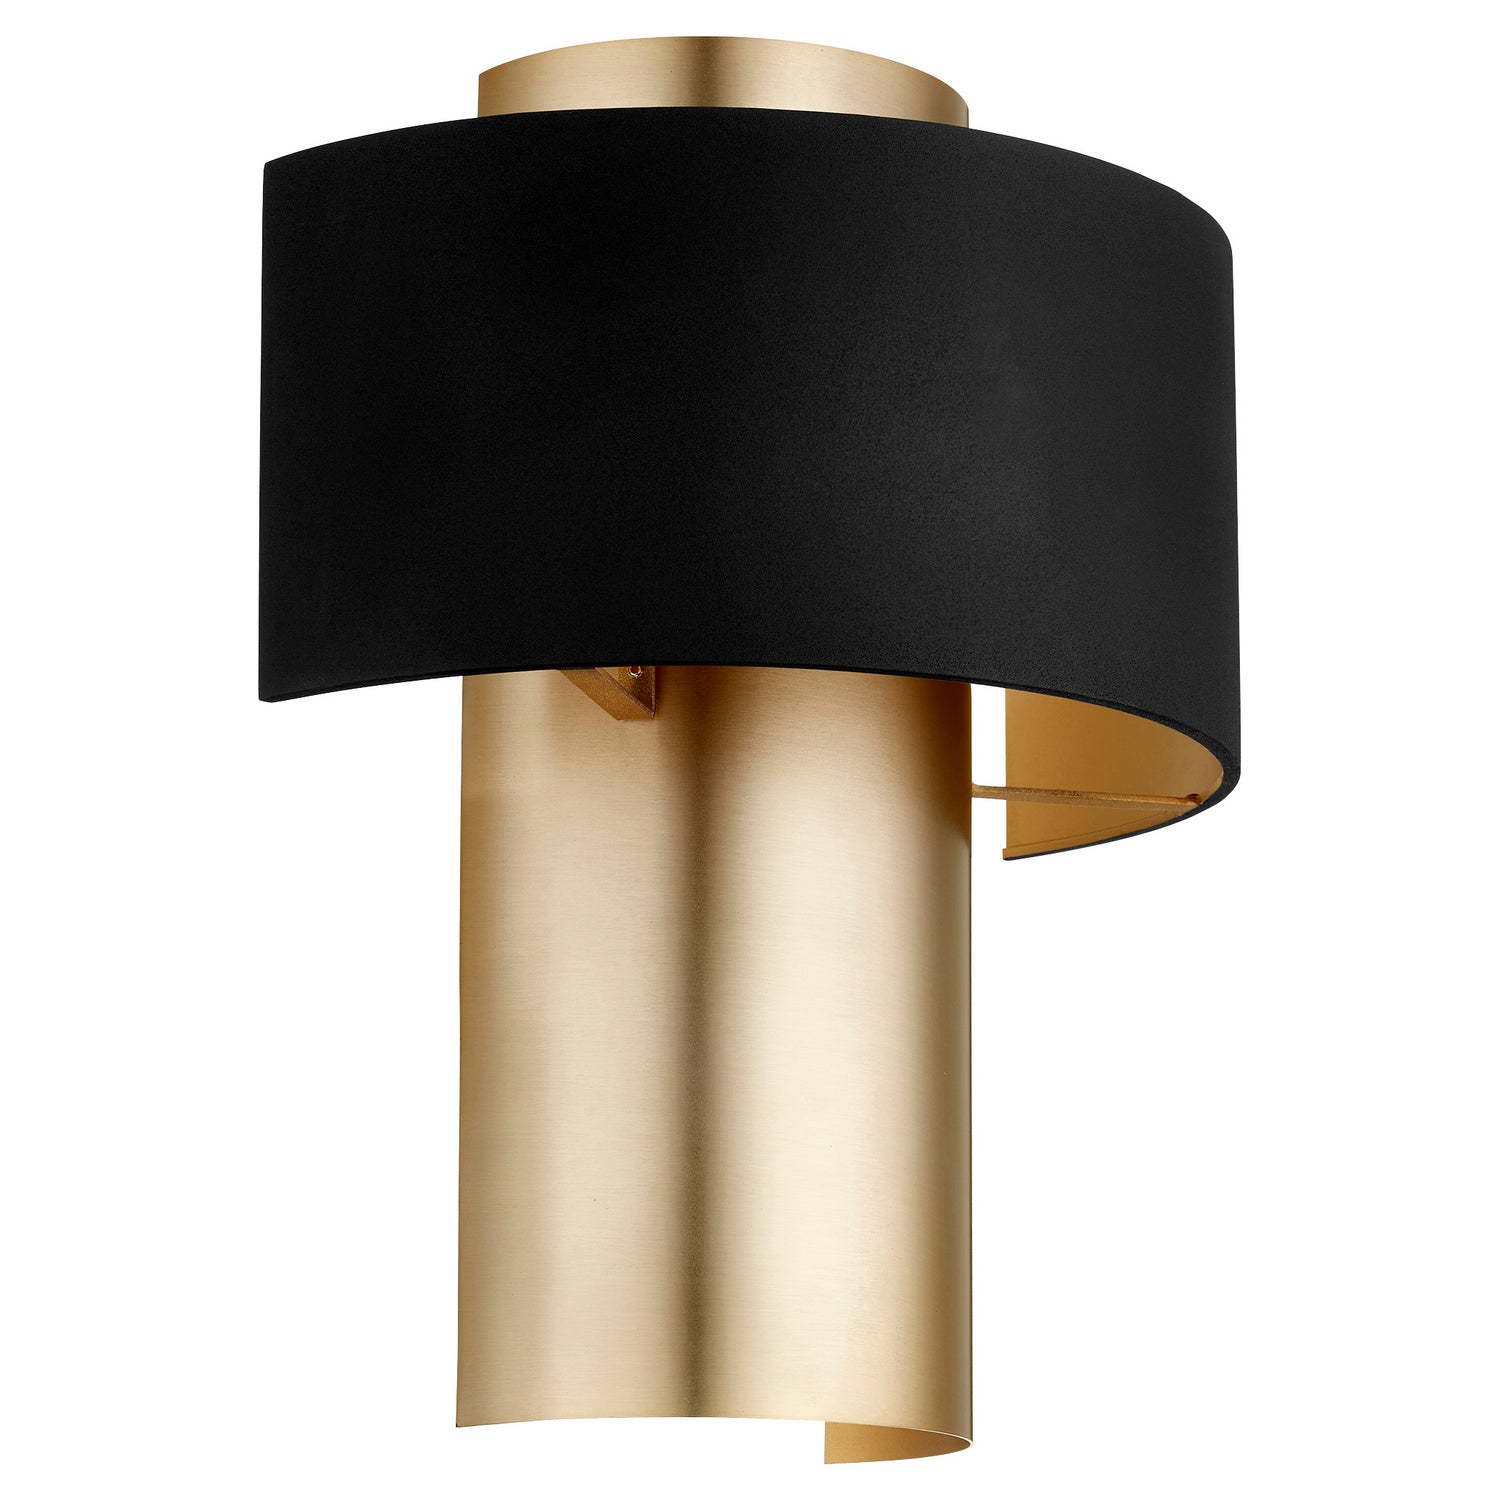 Quorum - 5611-6980 - One Light Wall Sconce - 5611 Half Drum Sconce - Textured Black w/ Aged Brass